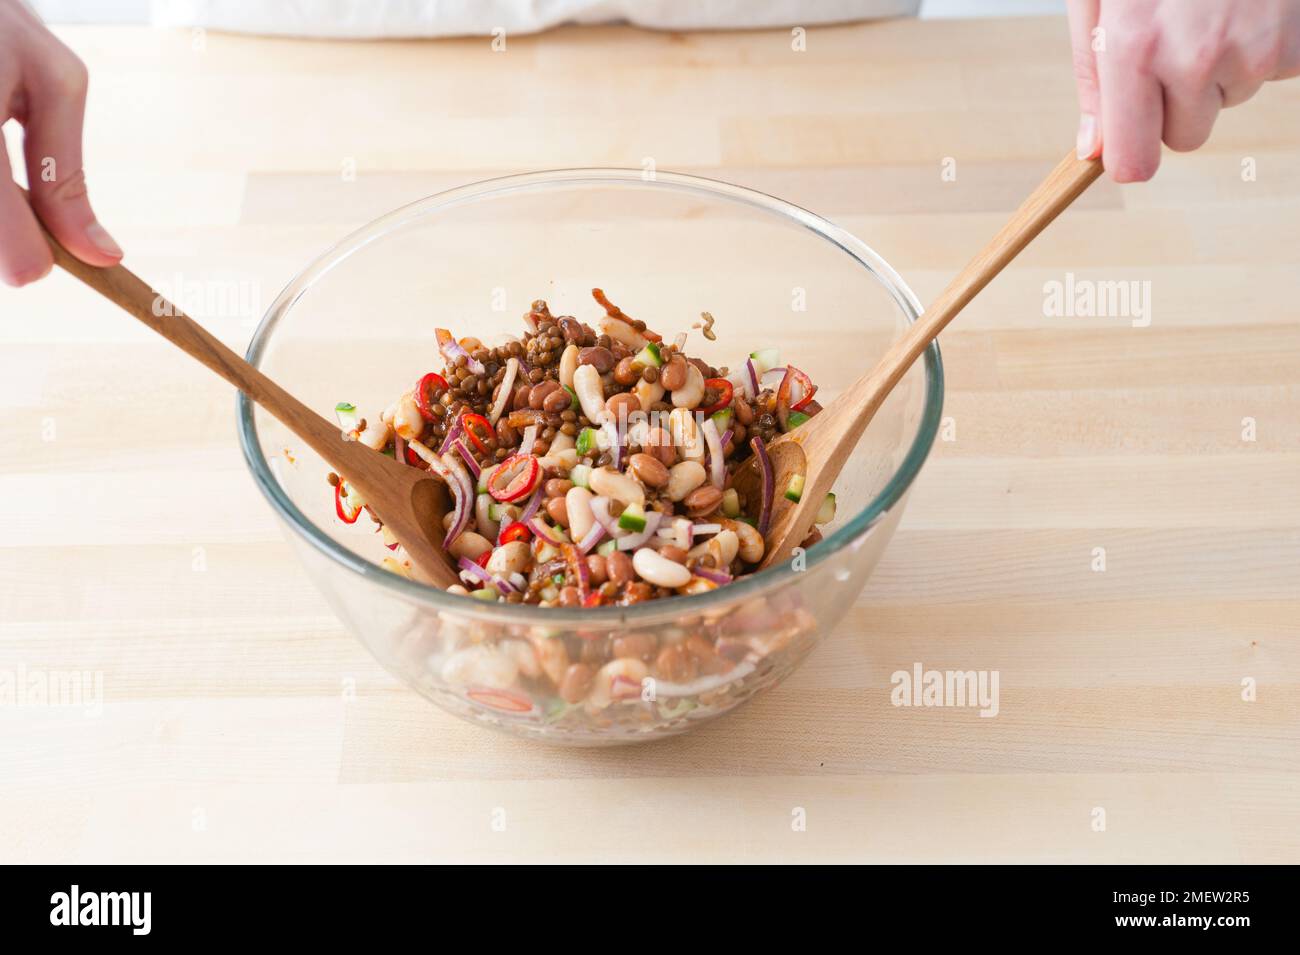 Making lentil and chilli bean salad, tossing ingredients together Stock Photo